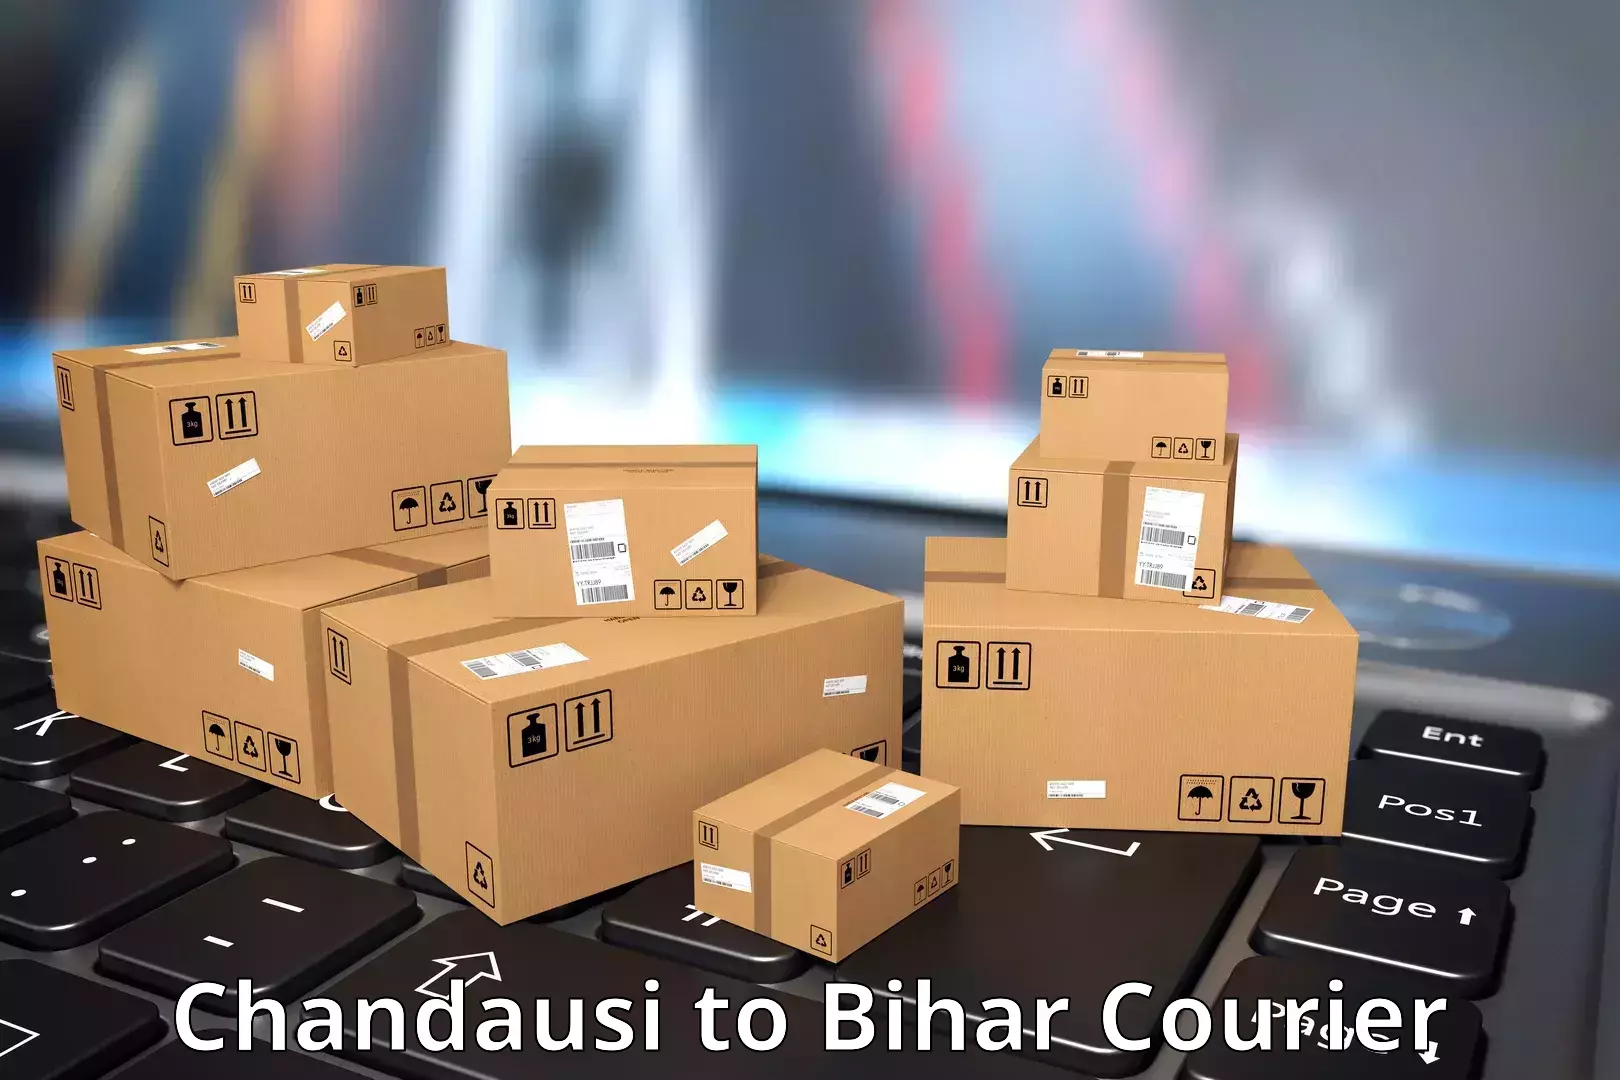 State-of-the-art courier technology Chandausi to Dhaka